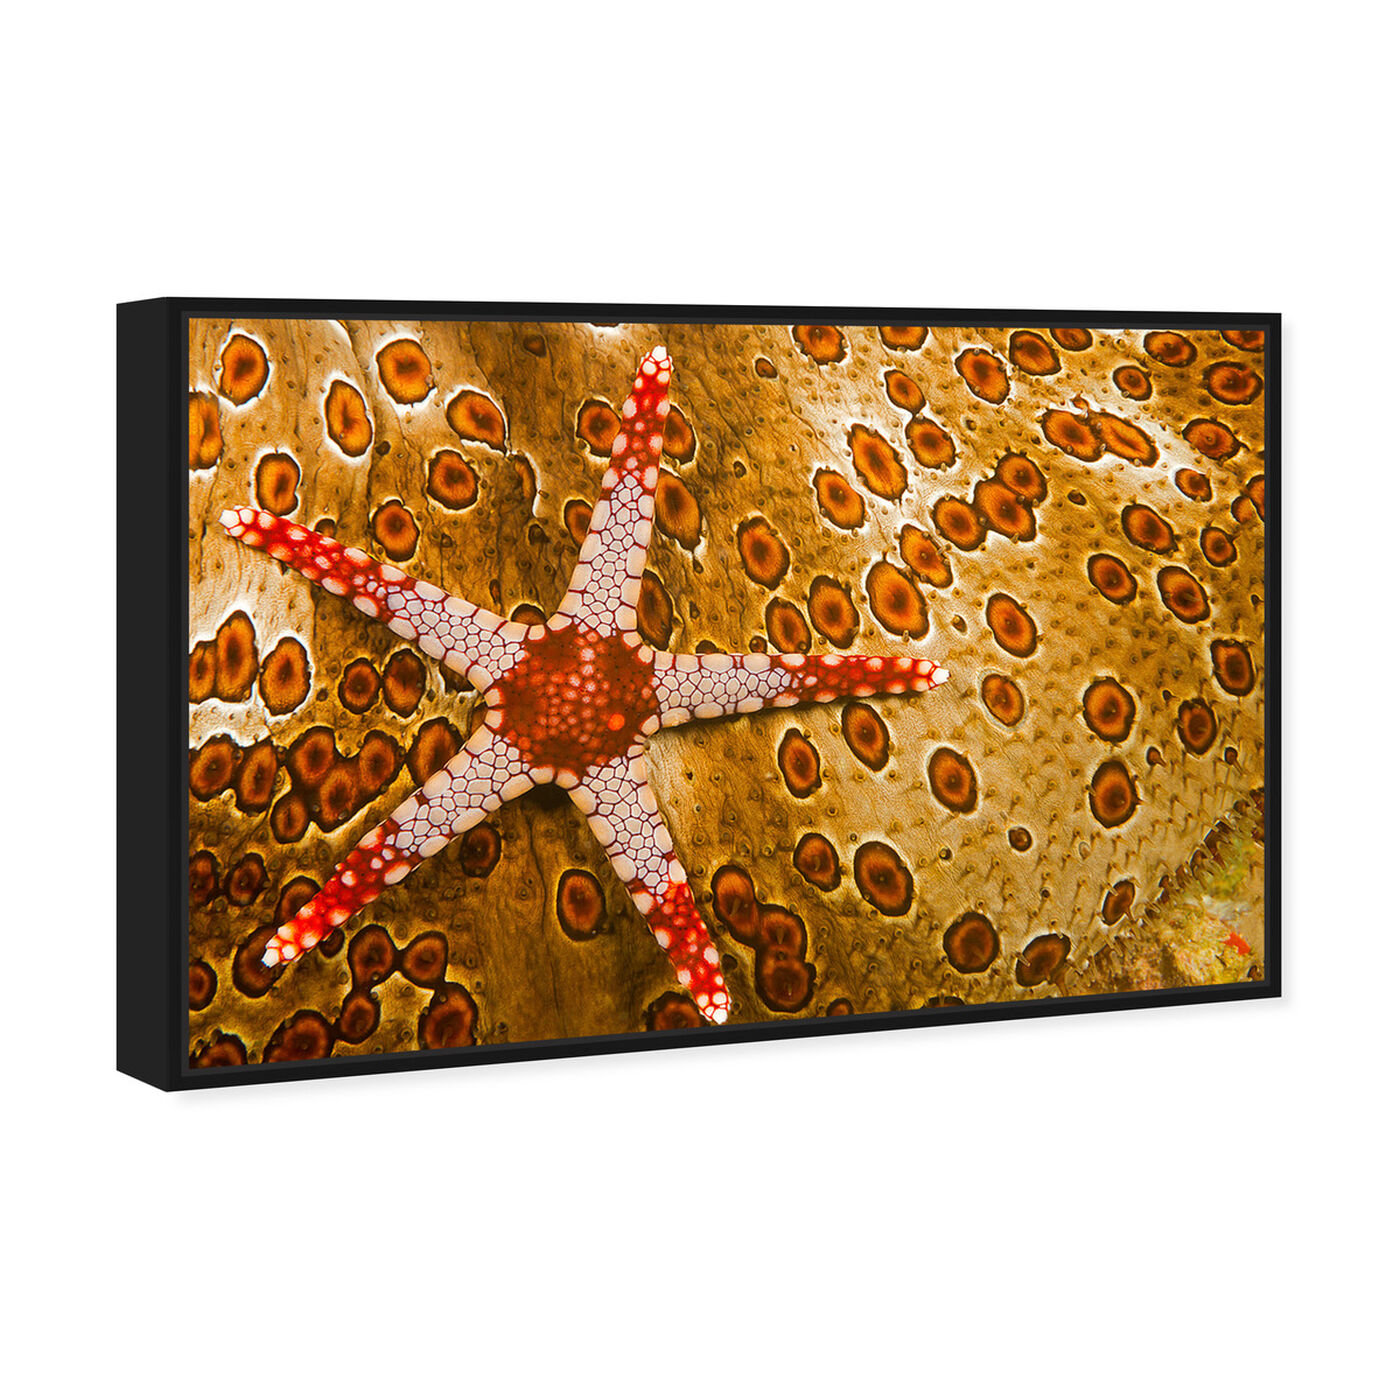 Angled view of Sea Star on Sea Cucumber by David Fleetham featuring nautical and coastal and marine life art.